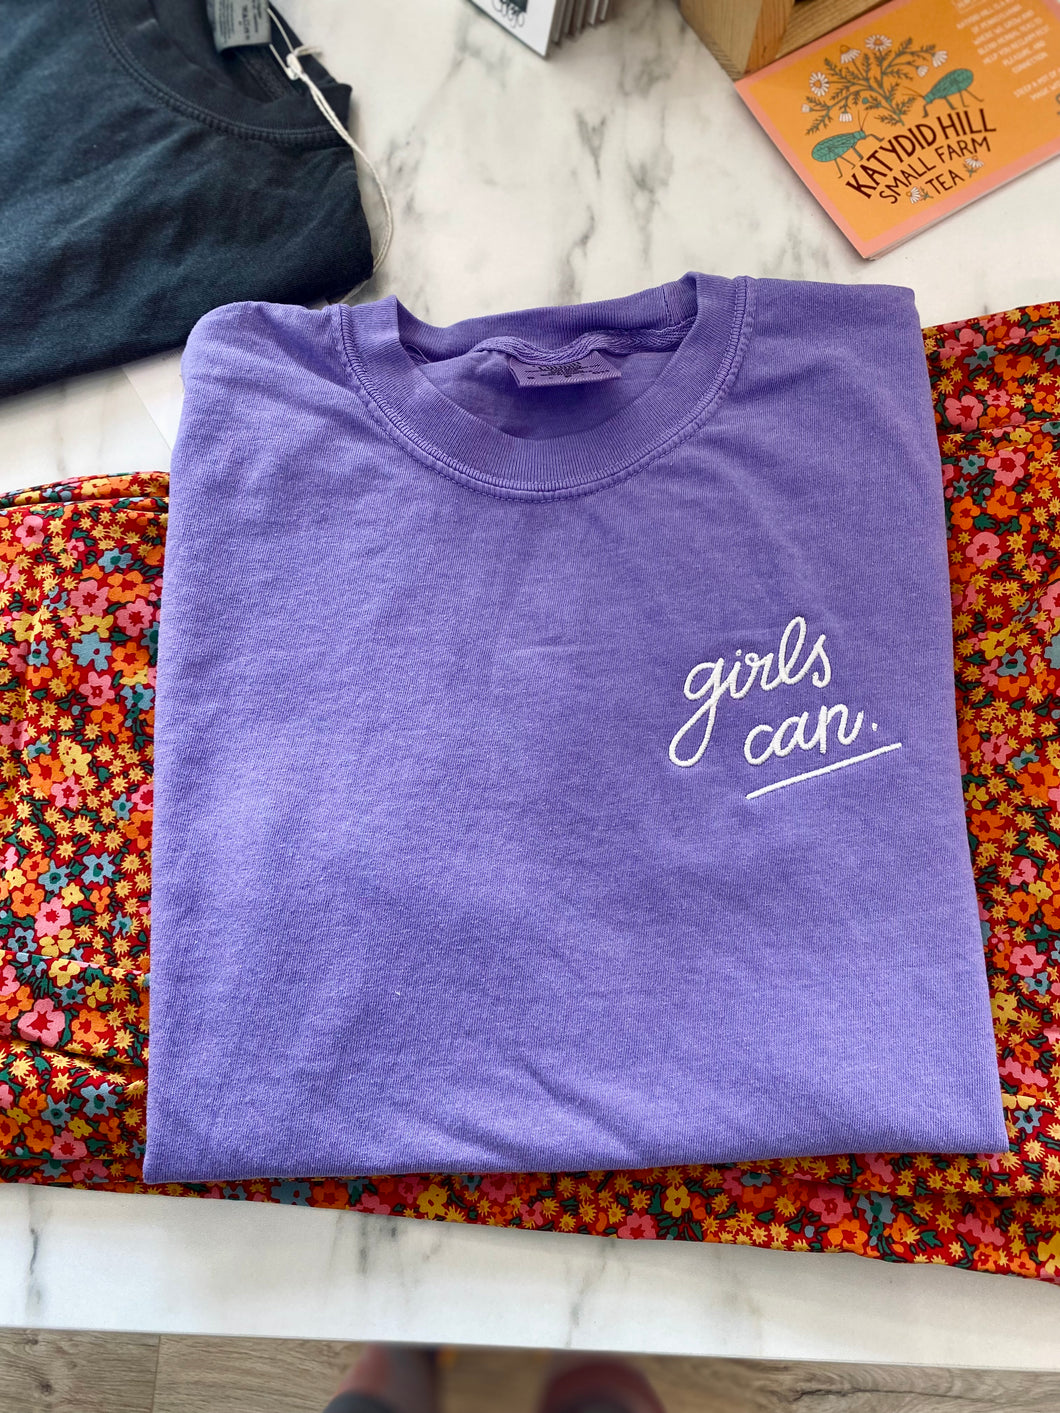 Girls Can Embroidered Tee - Unisex Adult (Made To Order)